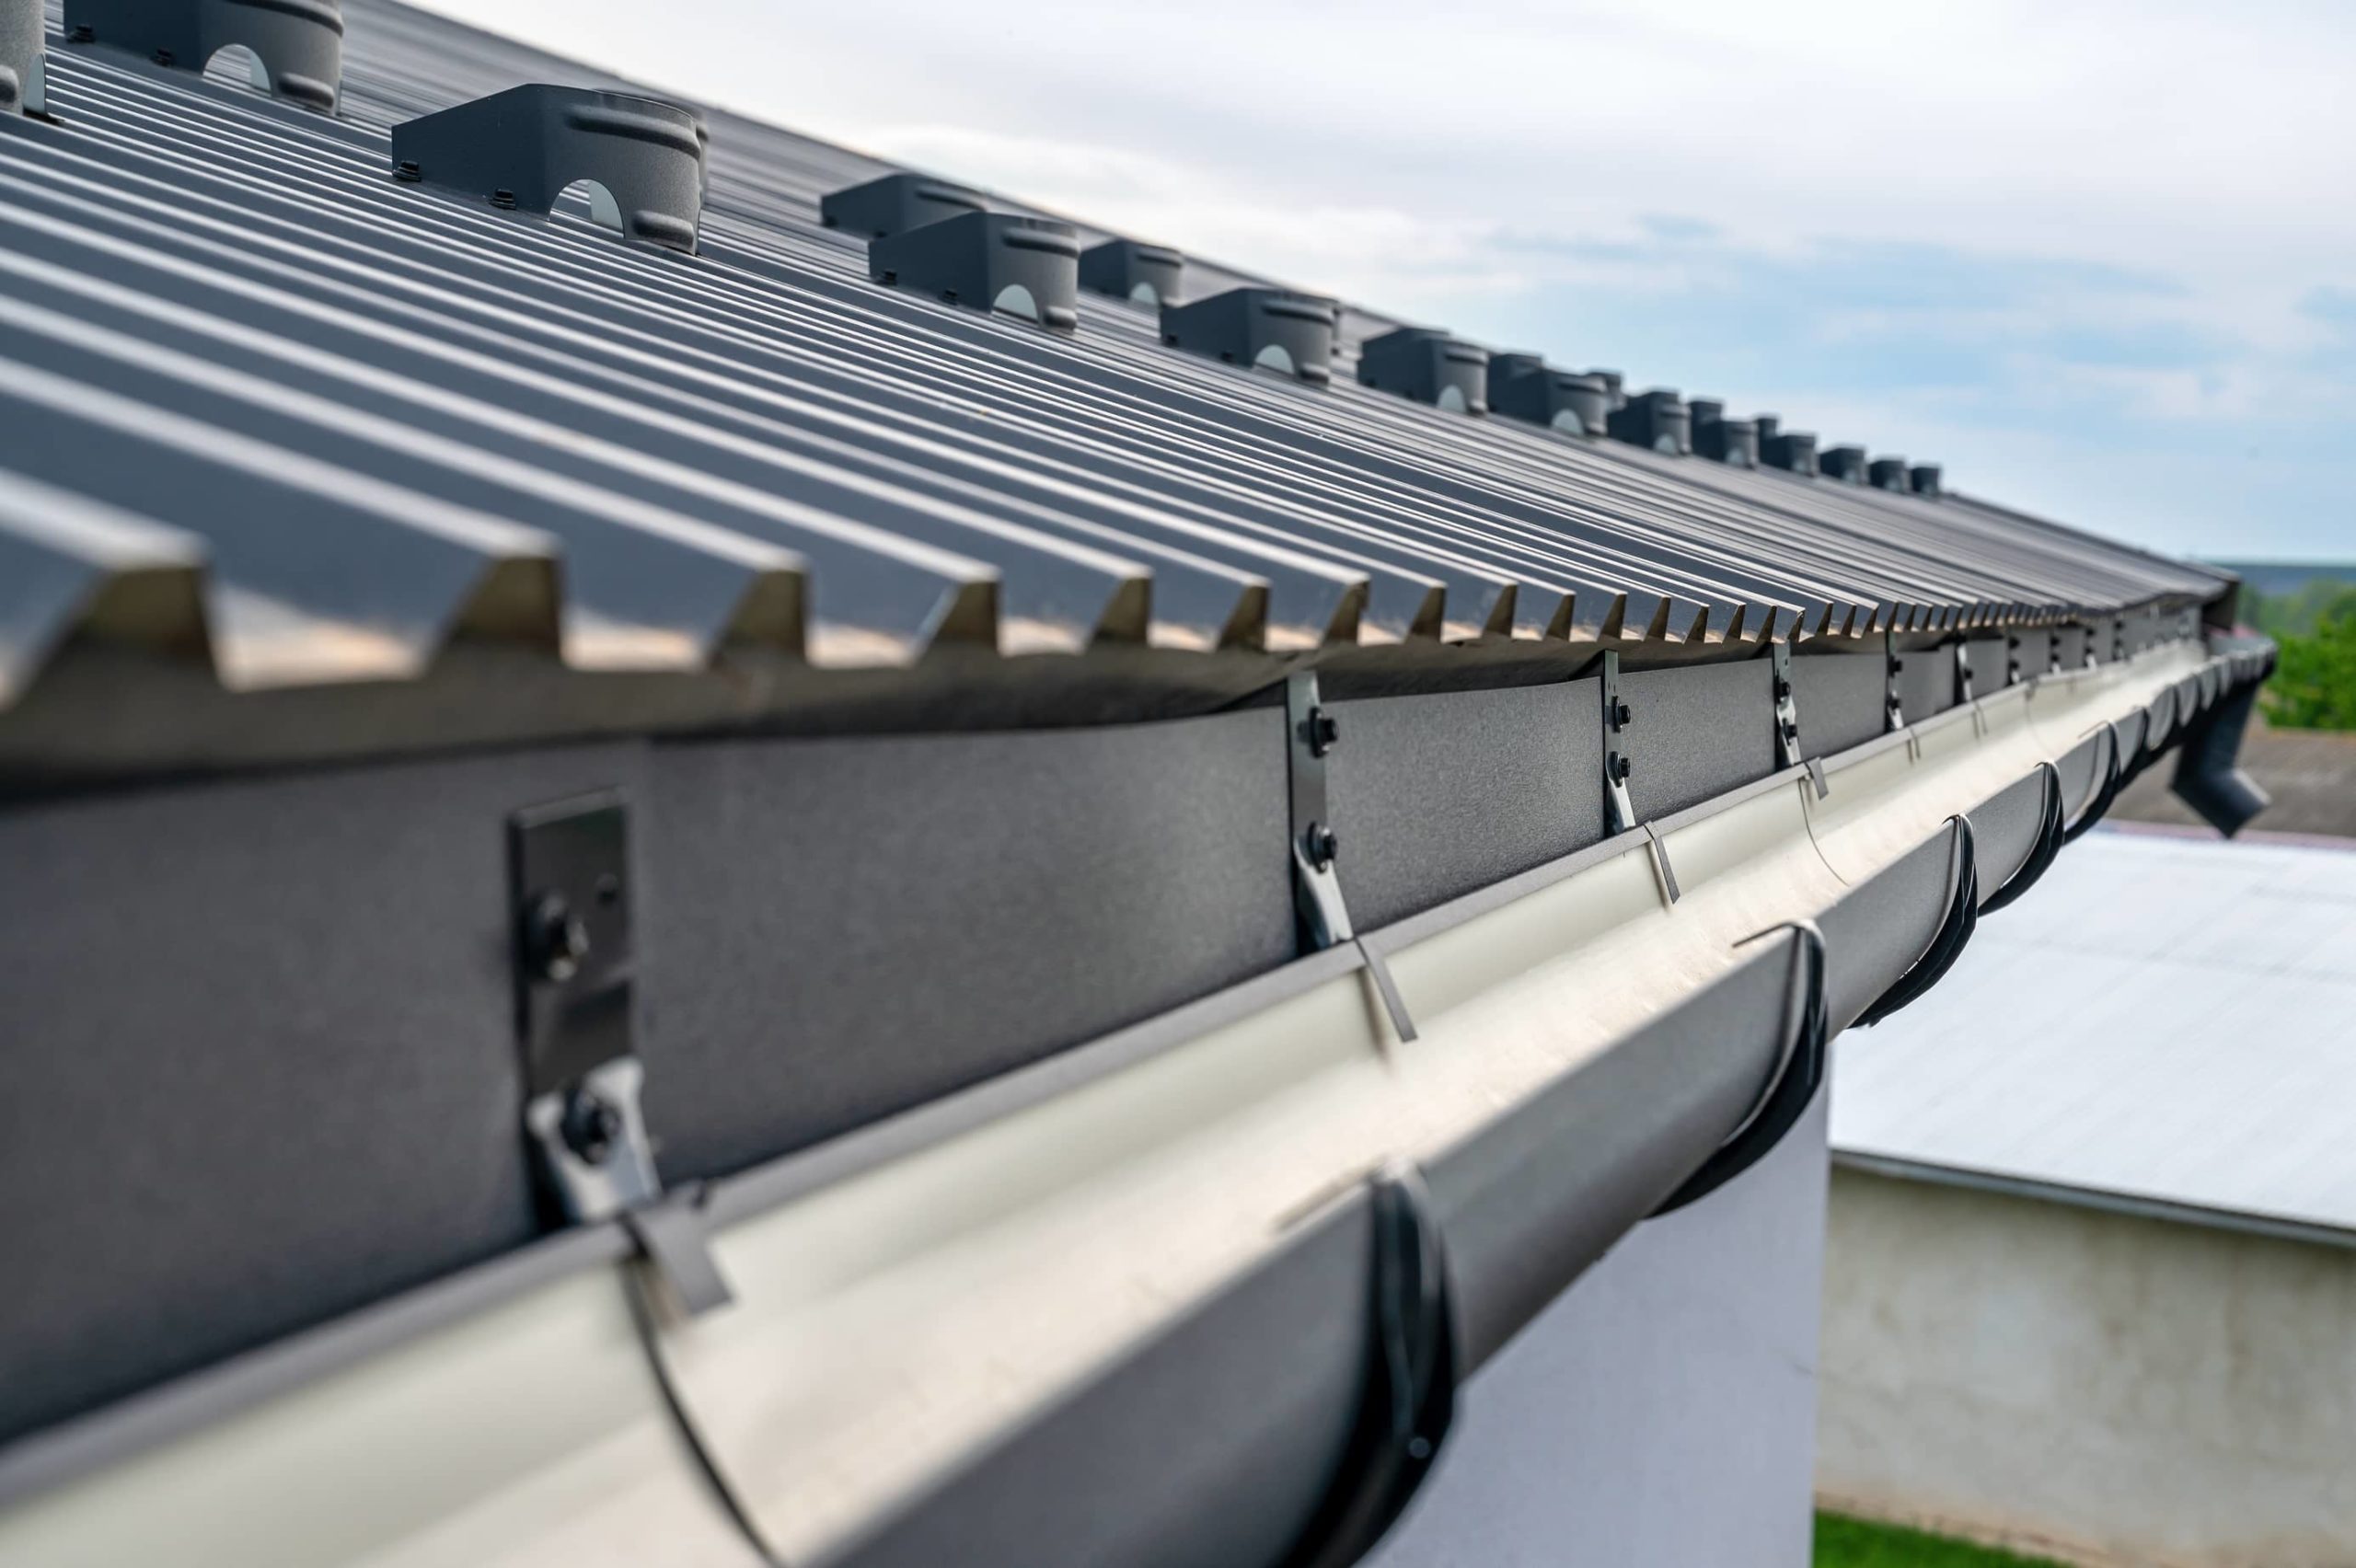 This is an image of a newly installed rain gutter on a residential property.